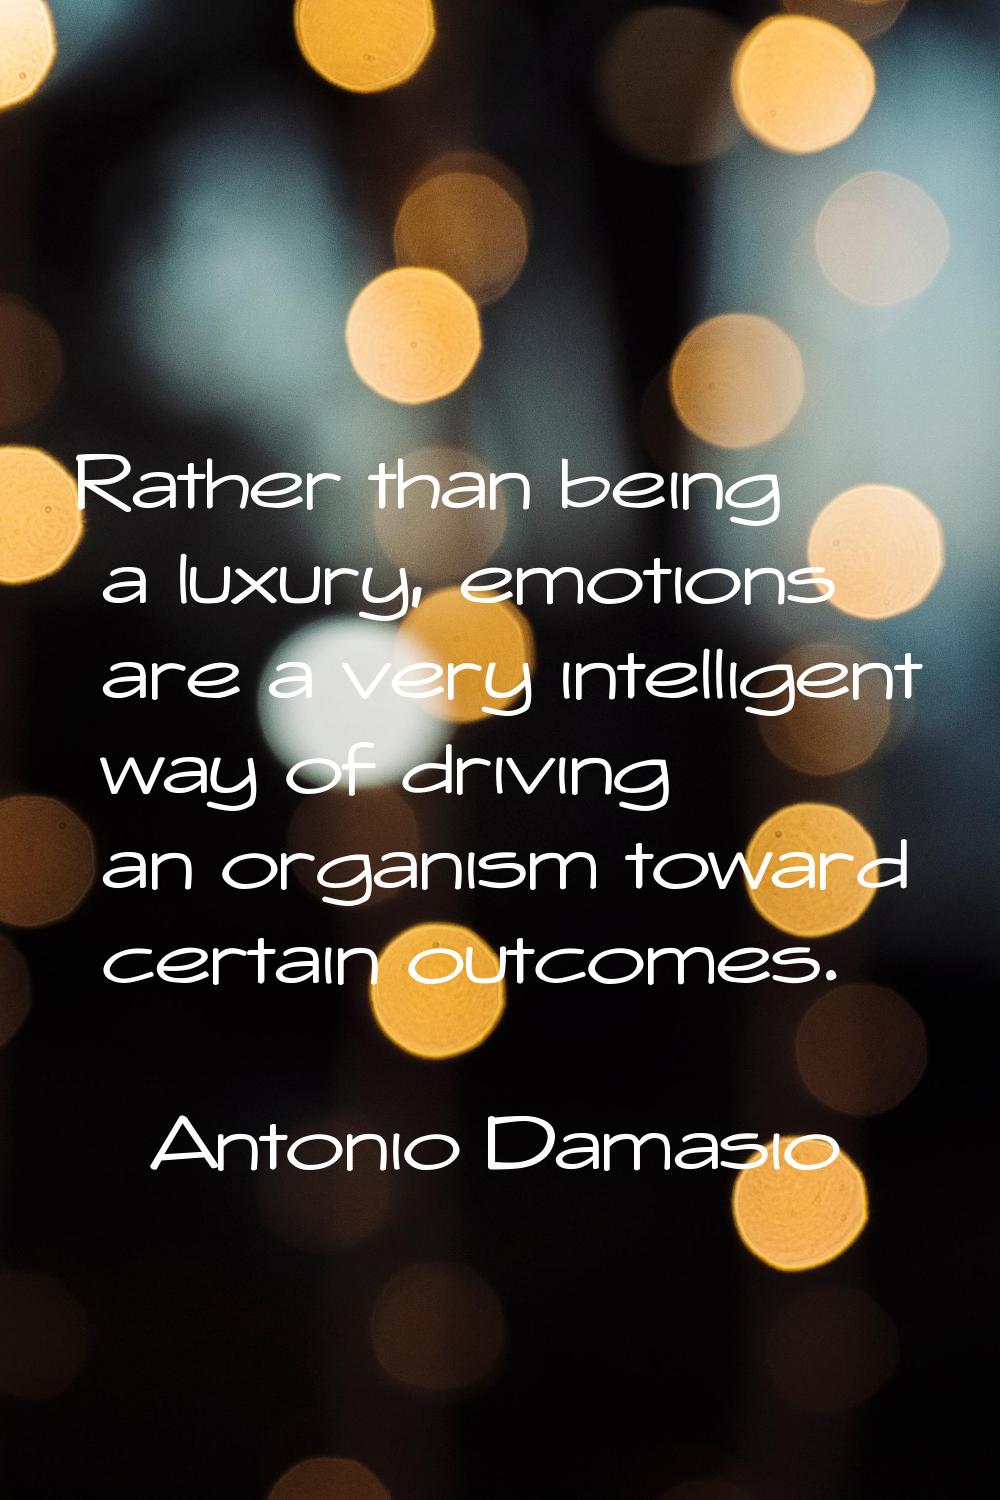 Rather than being a luxury, emotions are a very intelligent way of driving an organism toward certa